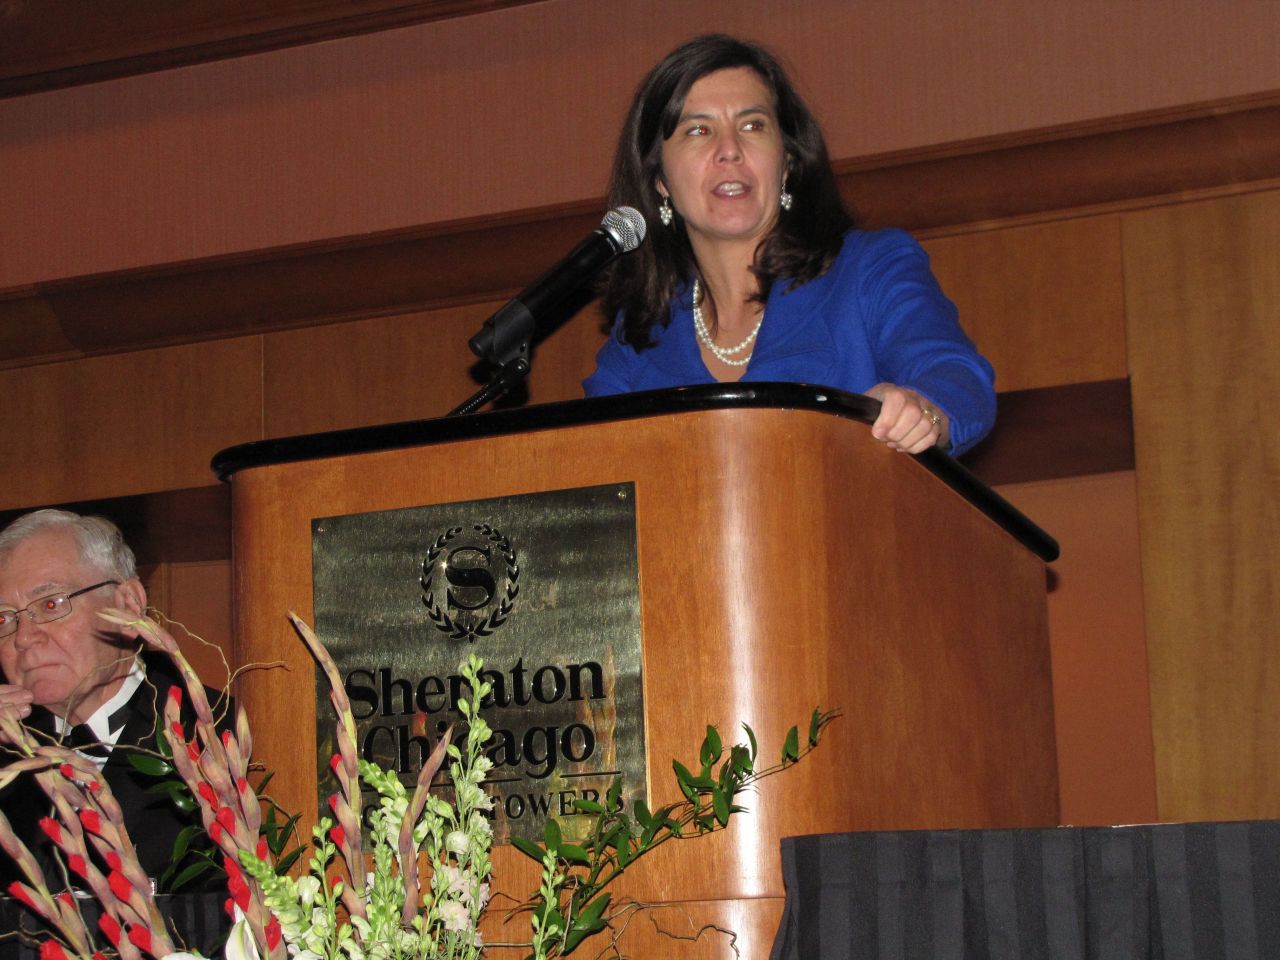 Cook County State's Attorney and Chicago Bar Association President Anita Alvarez speaks at the dinner. The Chicago Bar Association was co-sponsor of the event.